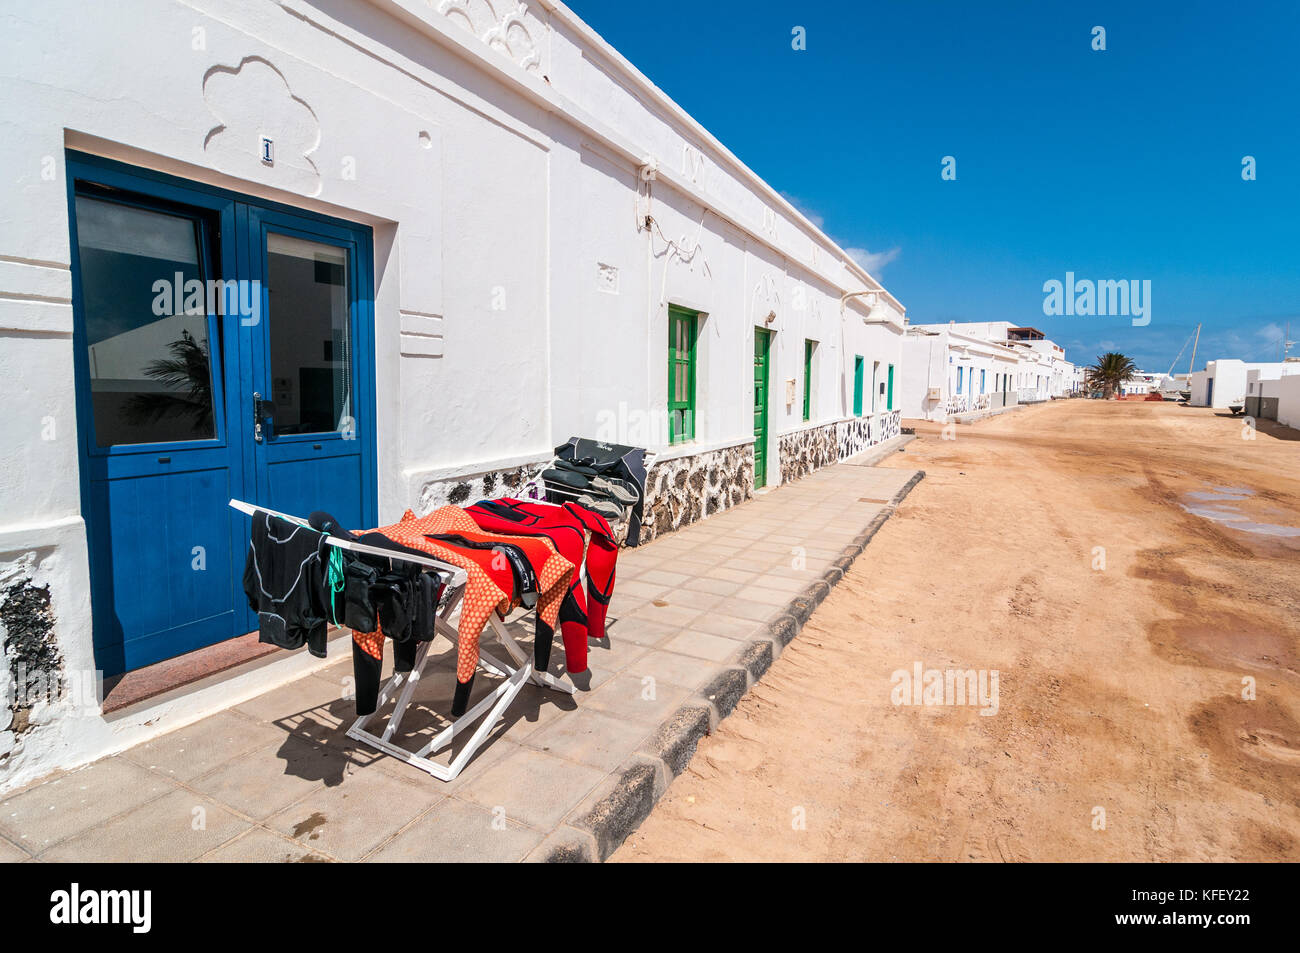 Diving equipment drying in the middle of the street, Caleta del Sebo, La Graciosa, Canary Islands, Spain Stock Photo